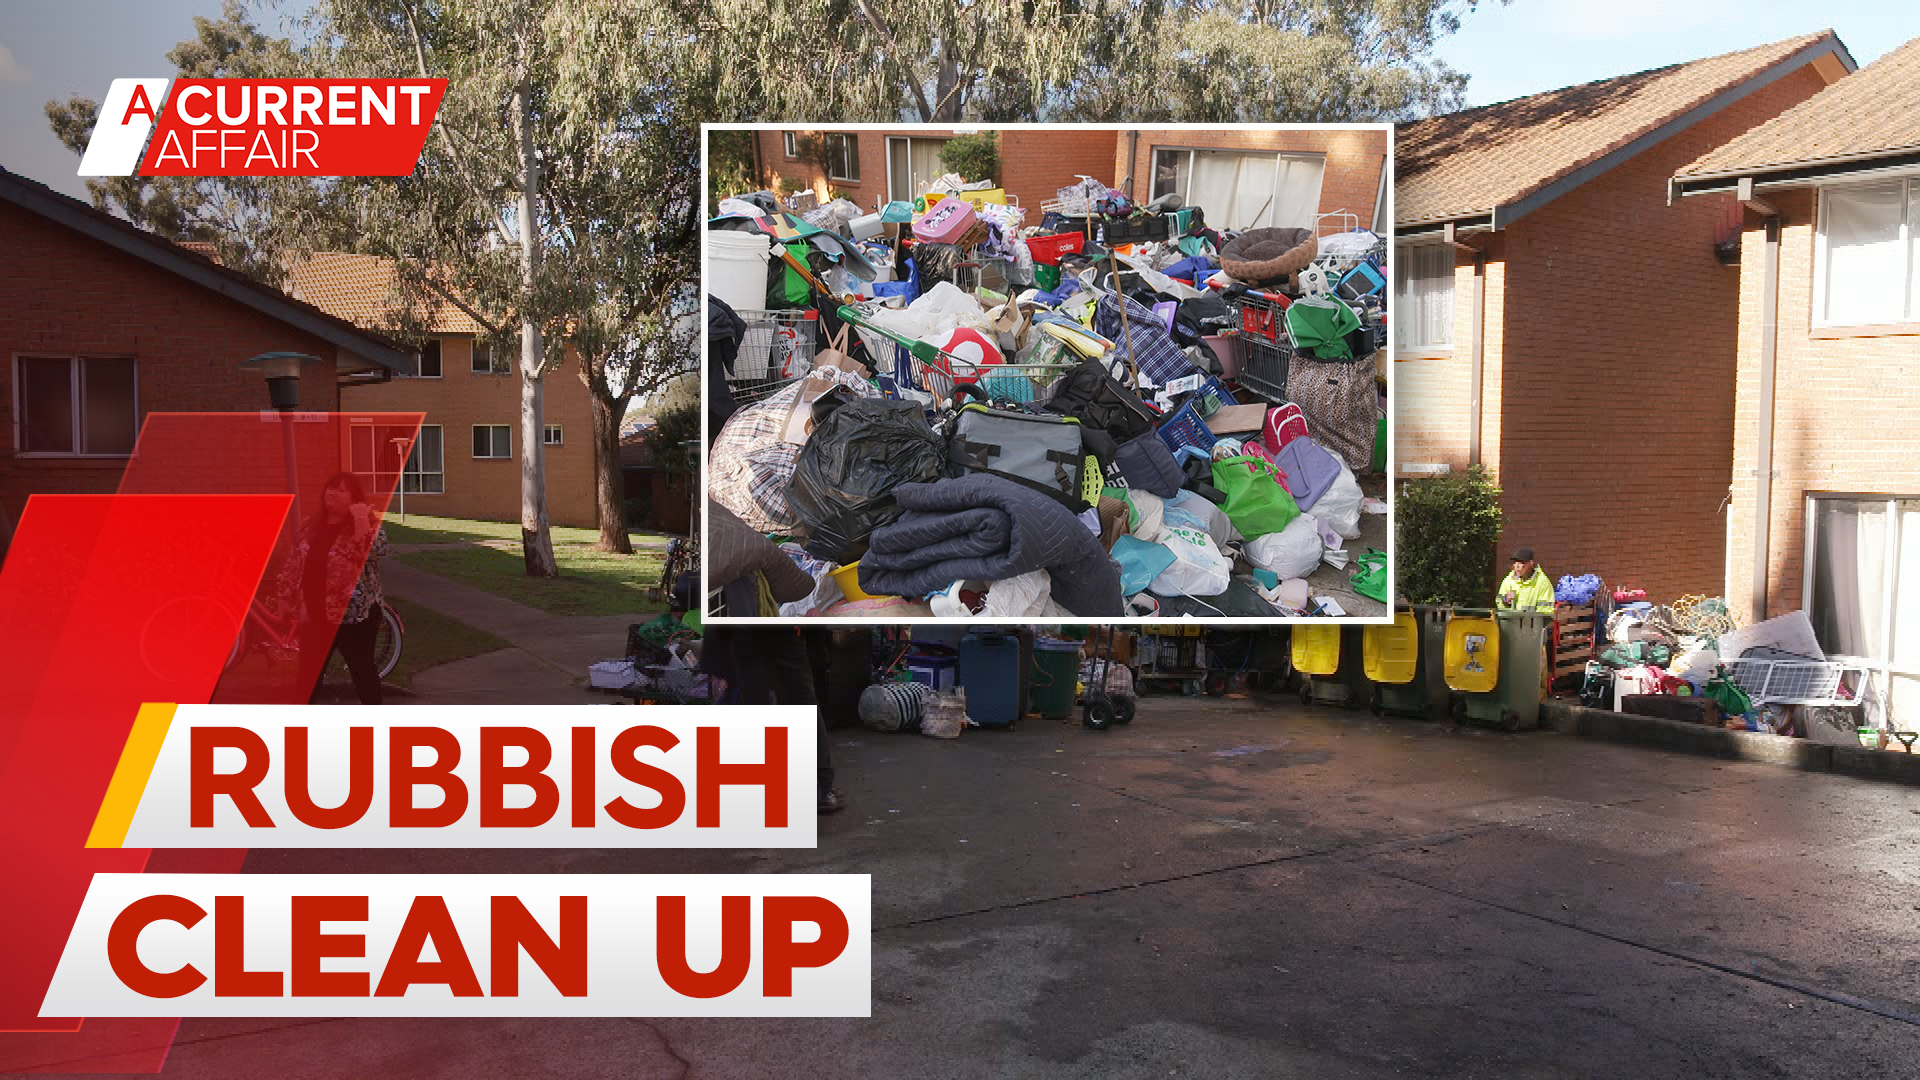 Crews roll in to clean mountain of rubbish from public housing estate